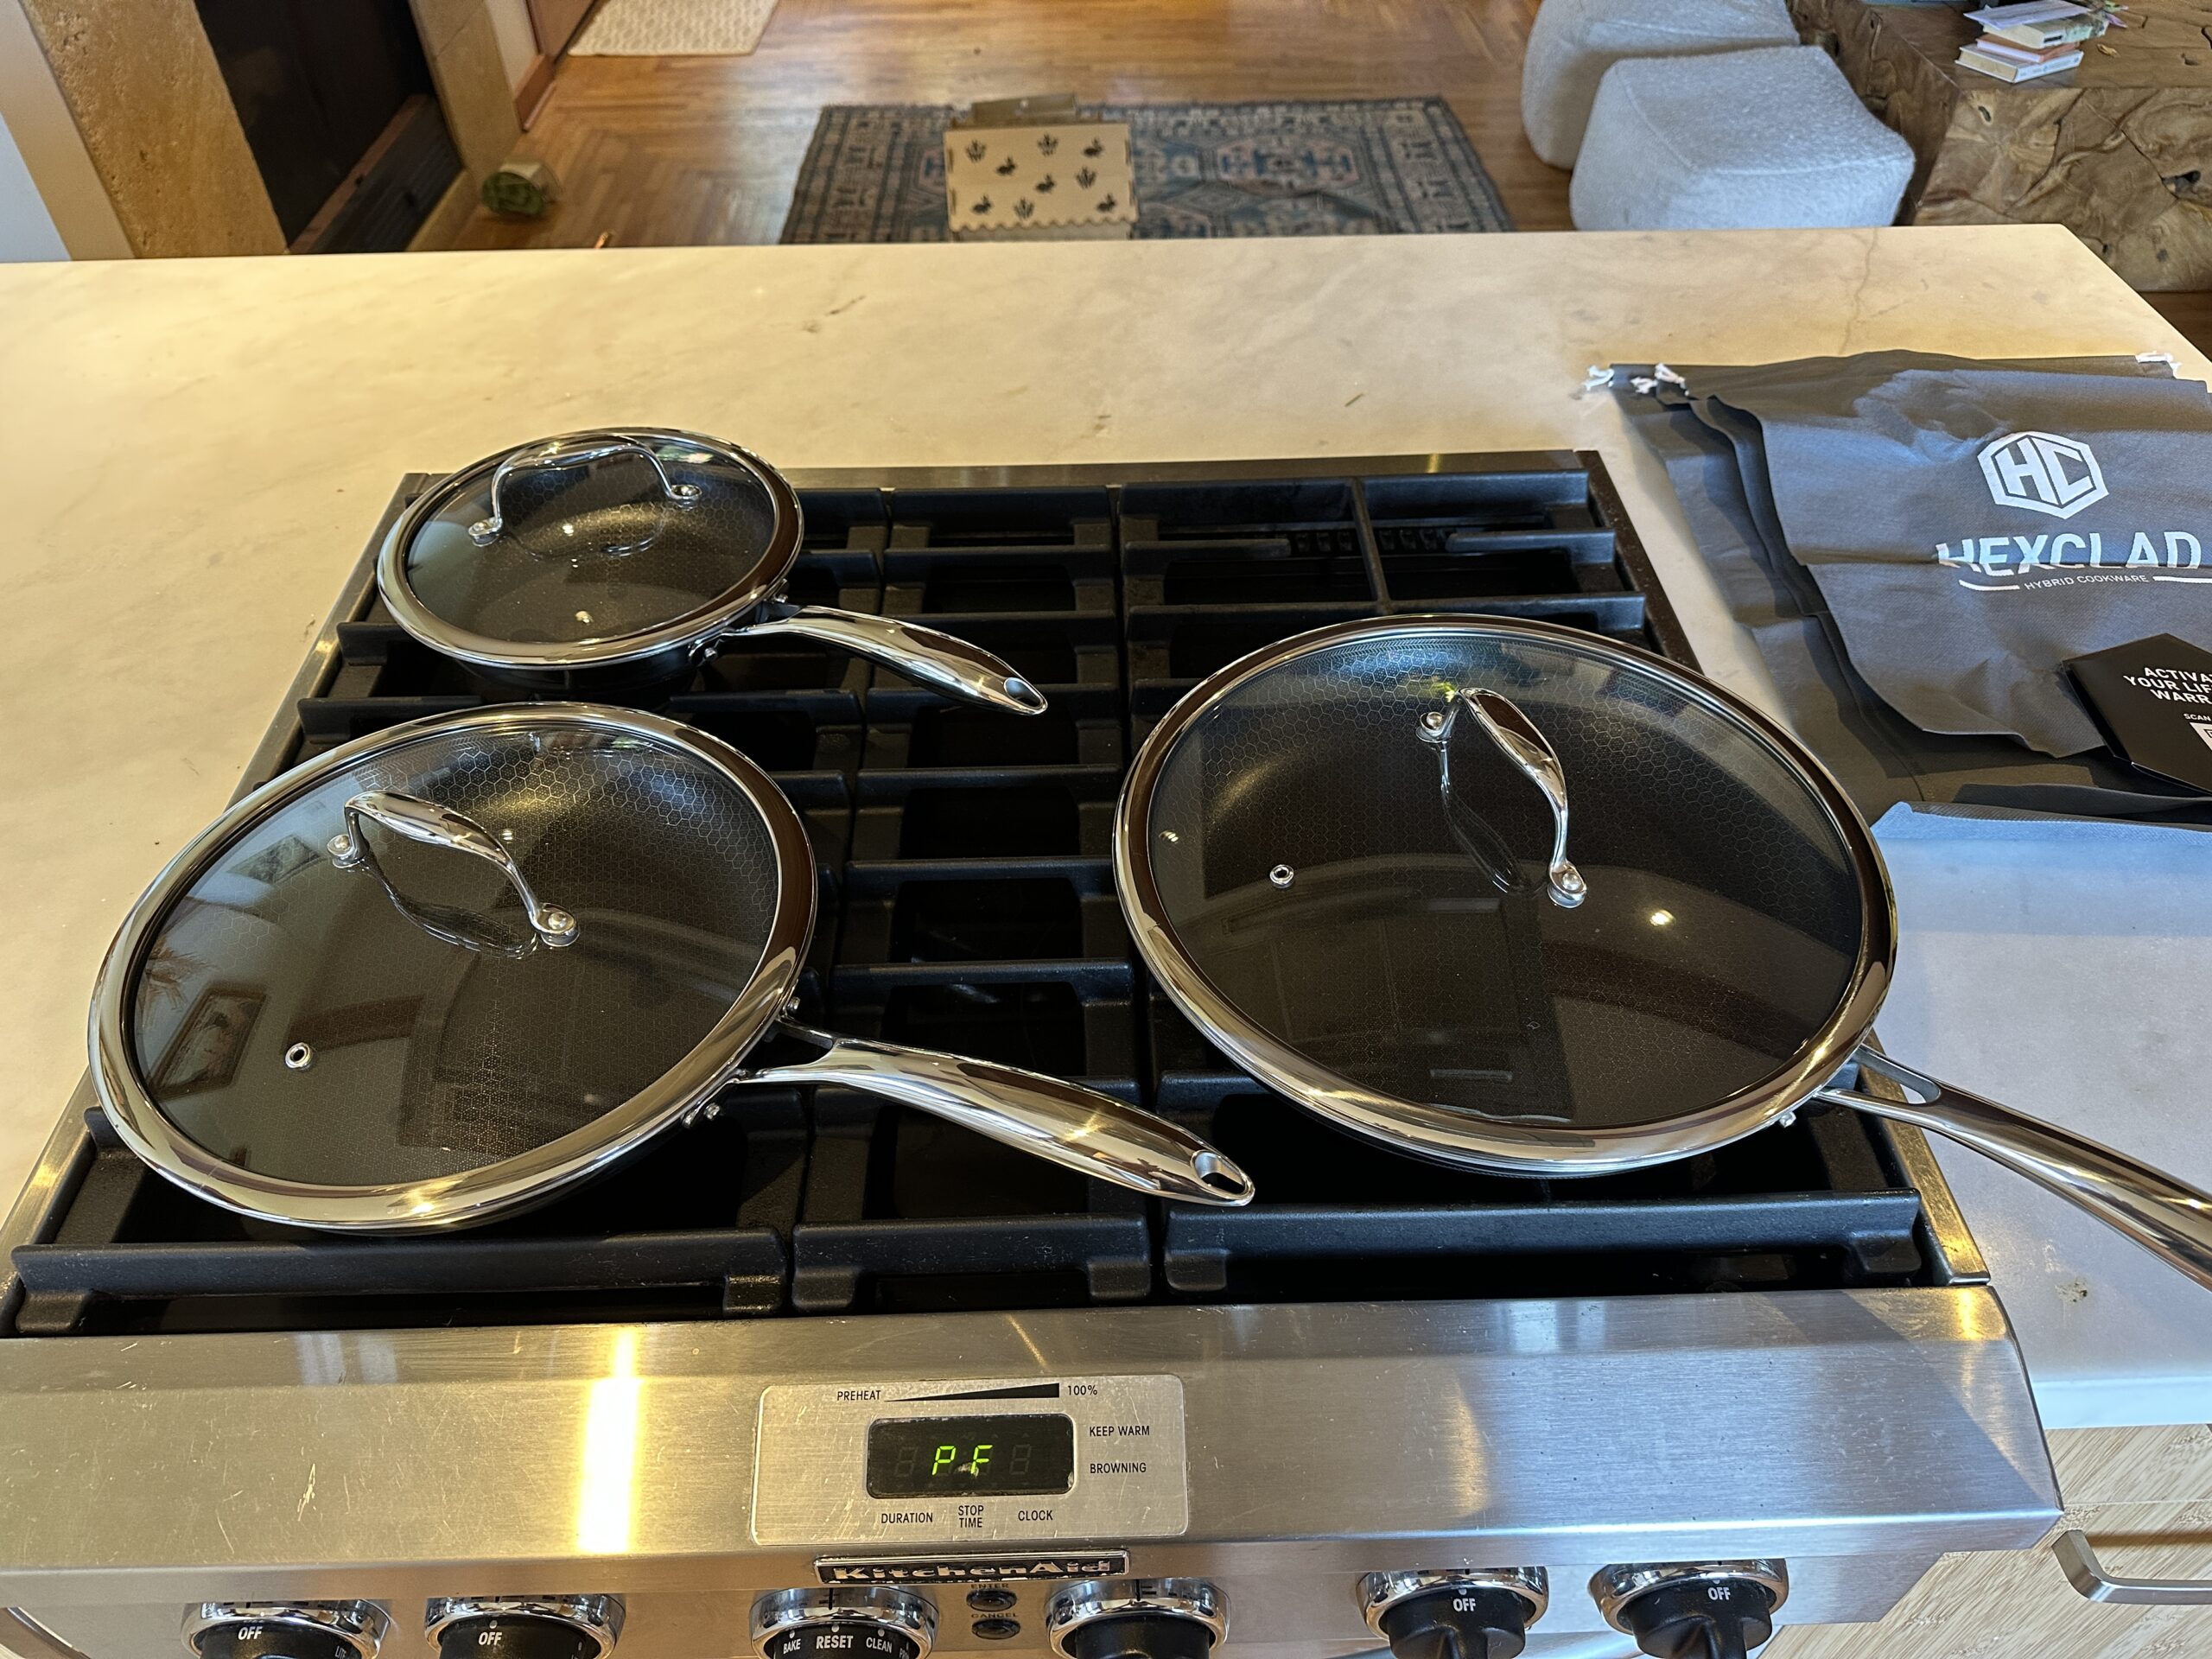 Brand New Hexclad Pans (and Wok) Set Is One of 2019's Best Cookware Upgrades